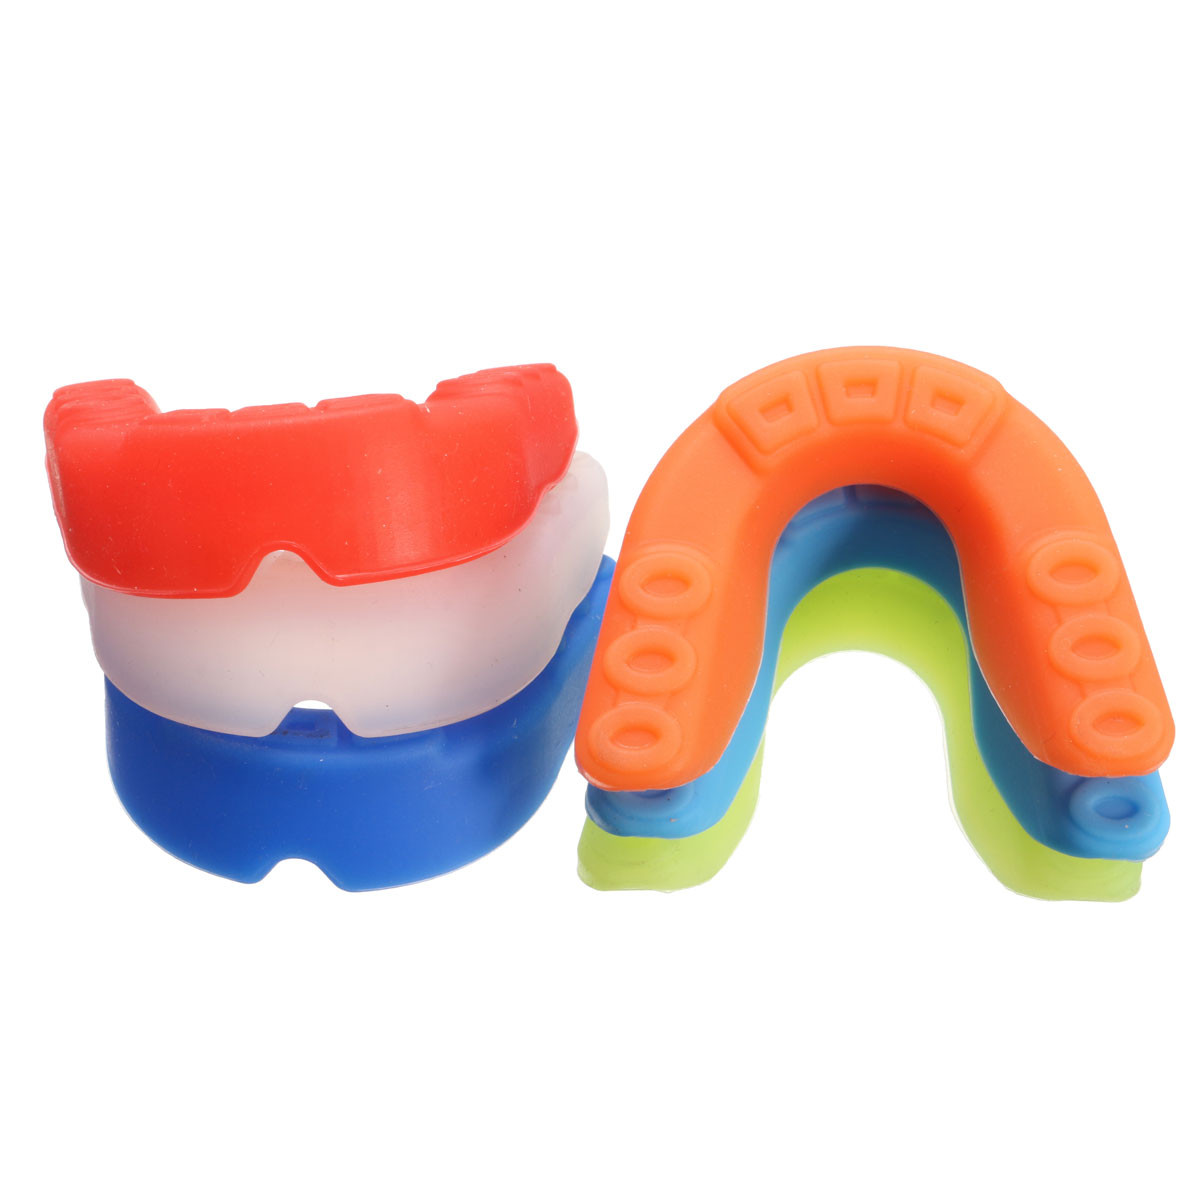 Silicone-Mouth-Guard-Gum-Shield-Boil-Bite-Teeth-Protection-for-MMA-Boxing-Braces-1632894-6